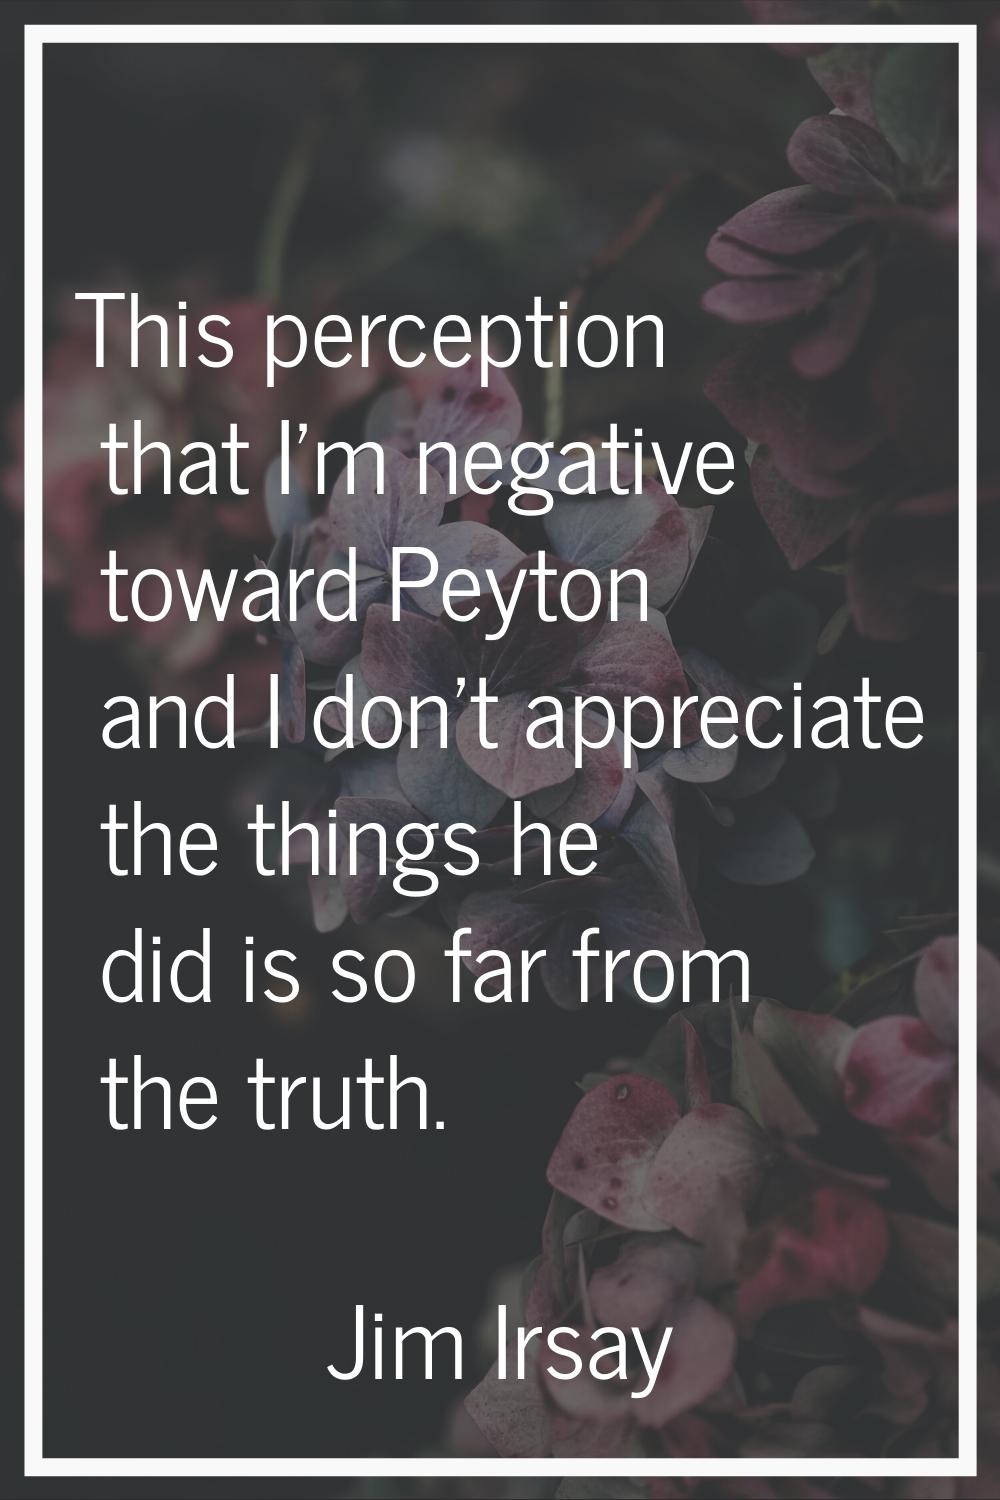 This perception that I'm negative toward Peyton and I don't appreciate the things he did is so far 